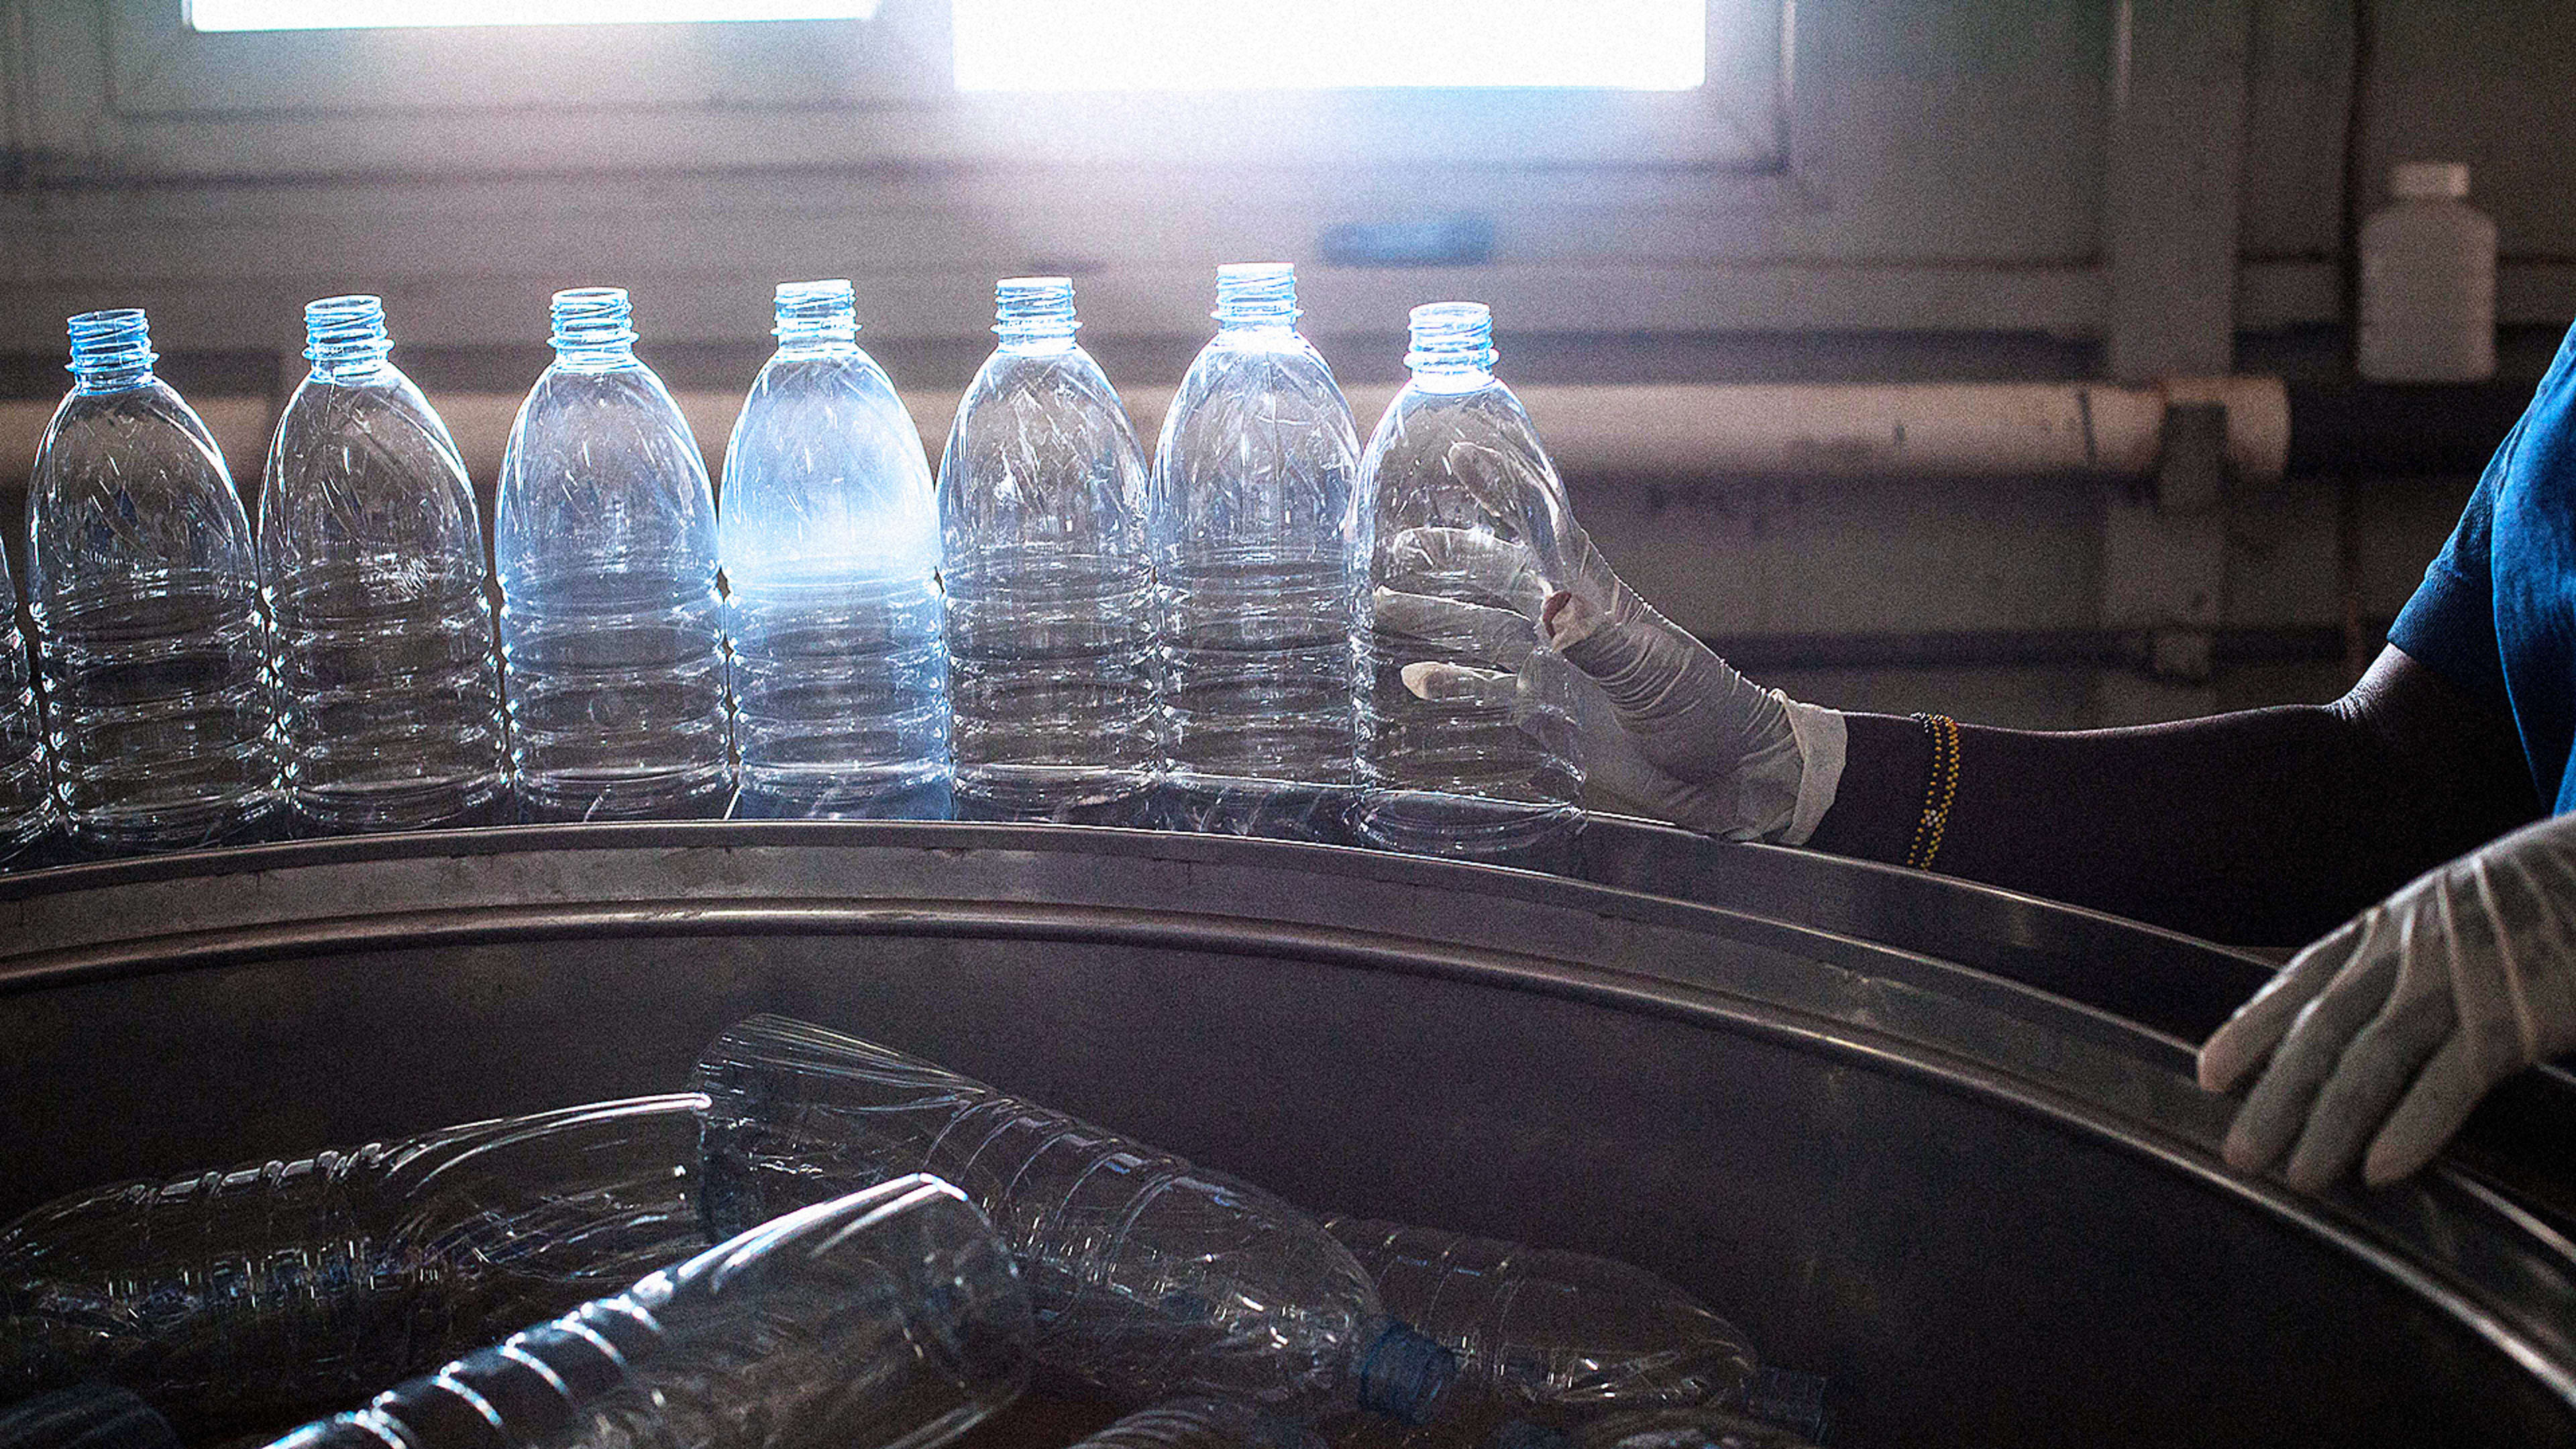 Good Lord, The World Is Using Almost 500 Billion Plastic Water Bottles A Year